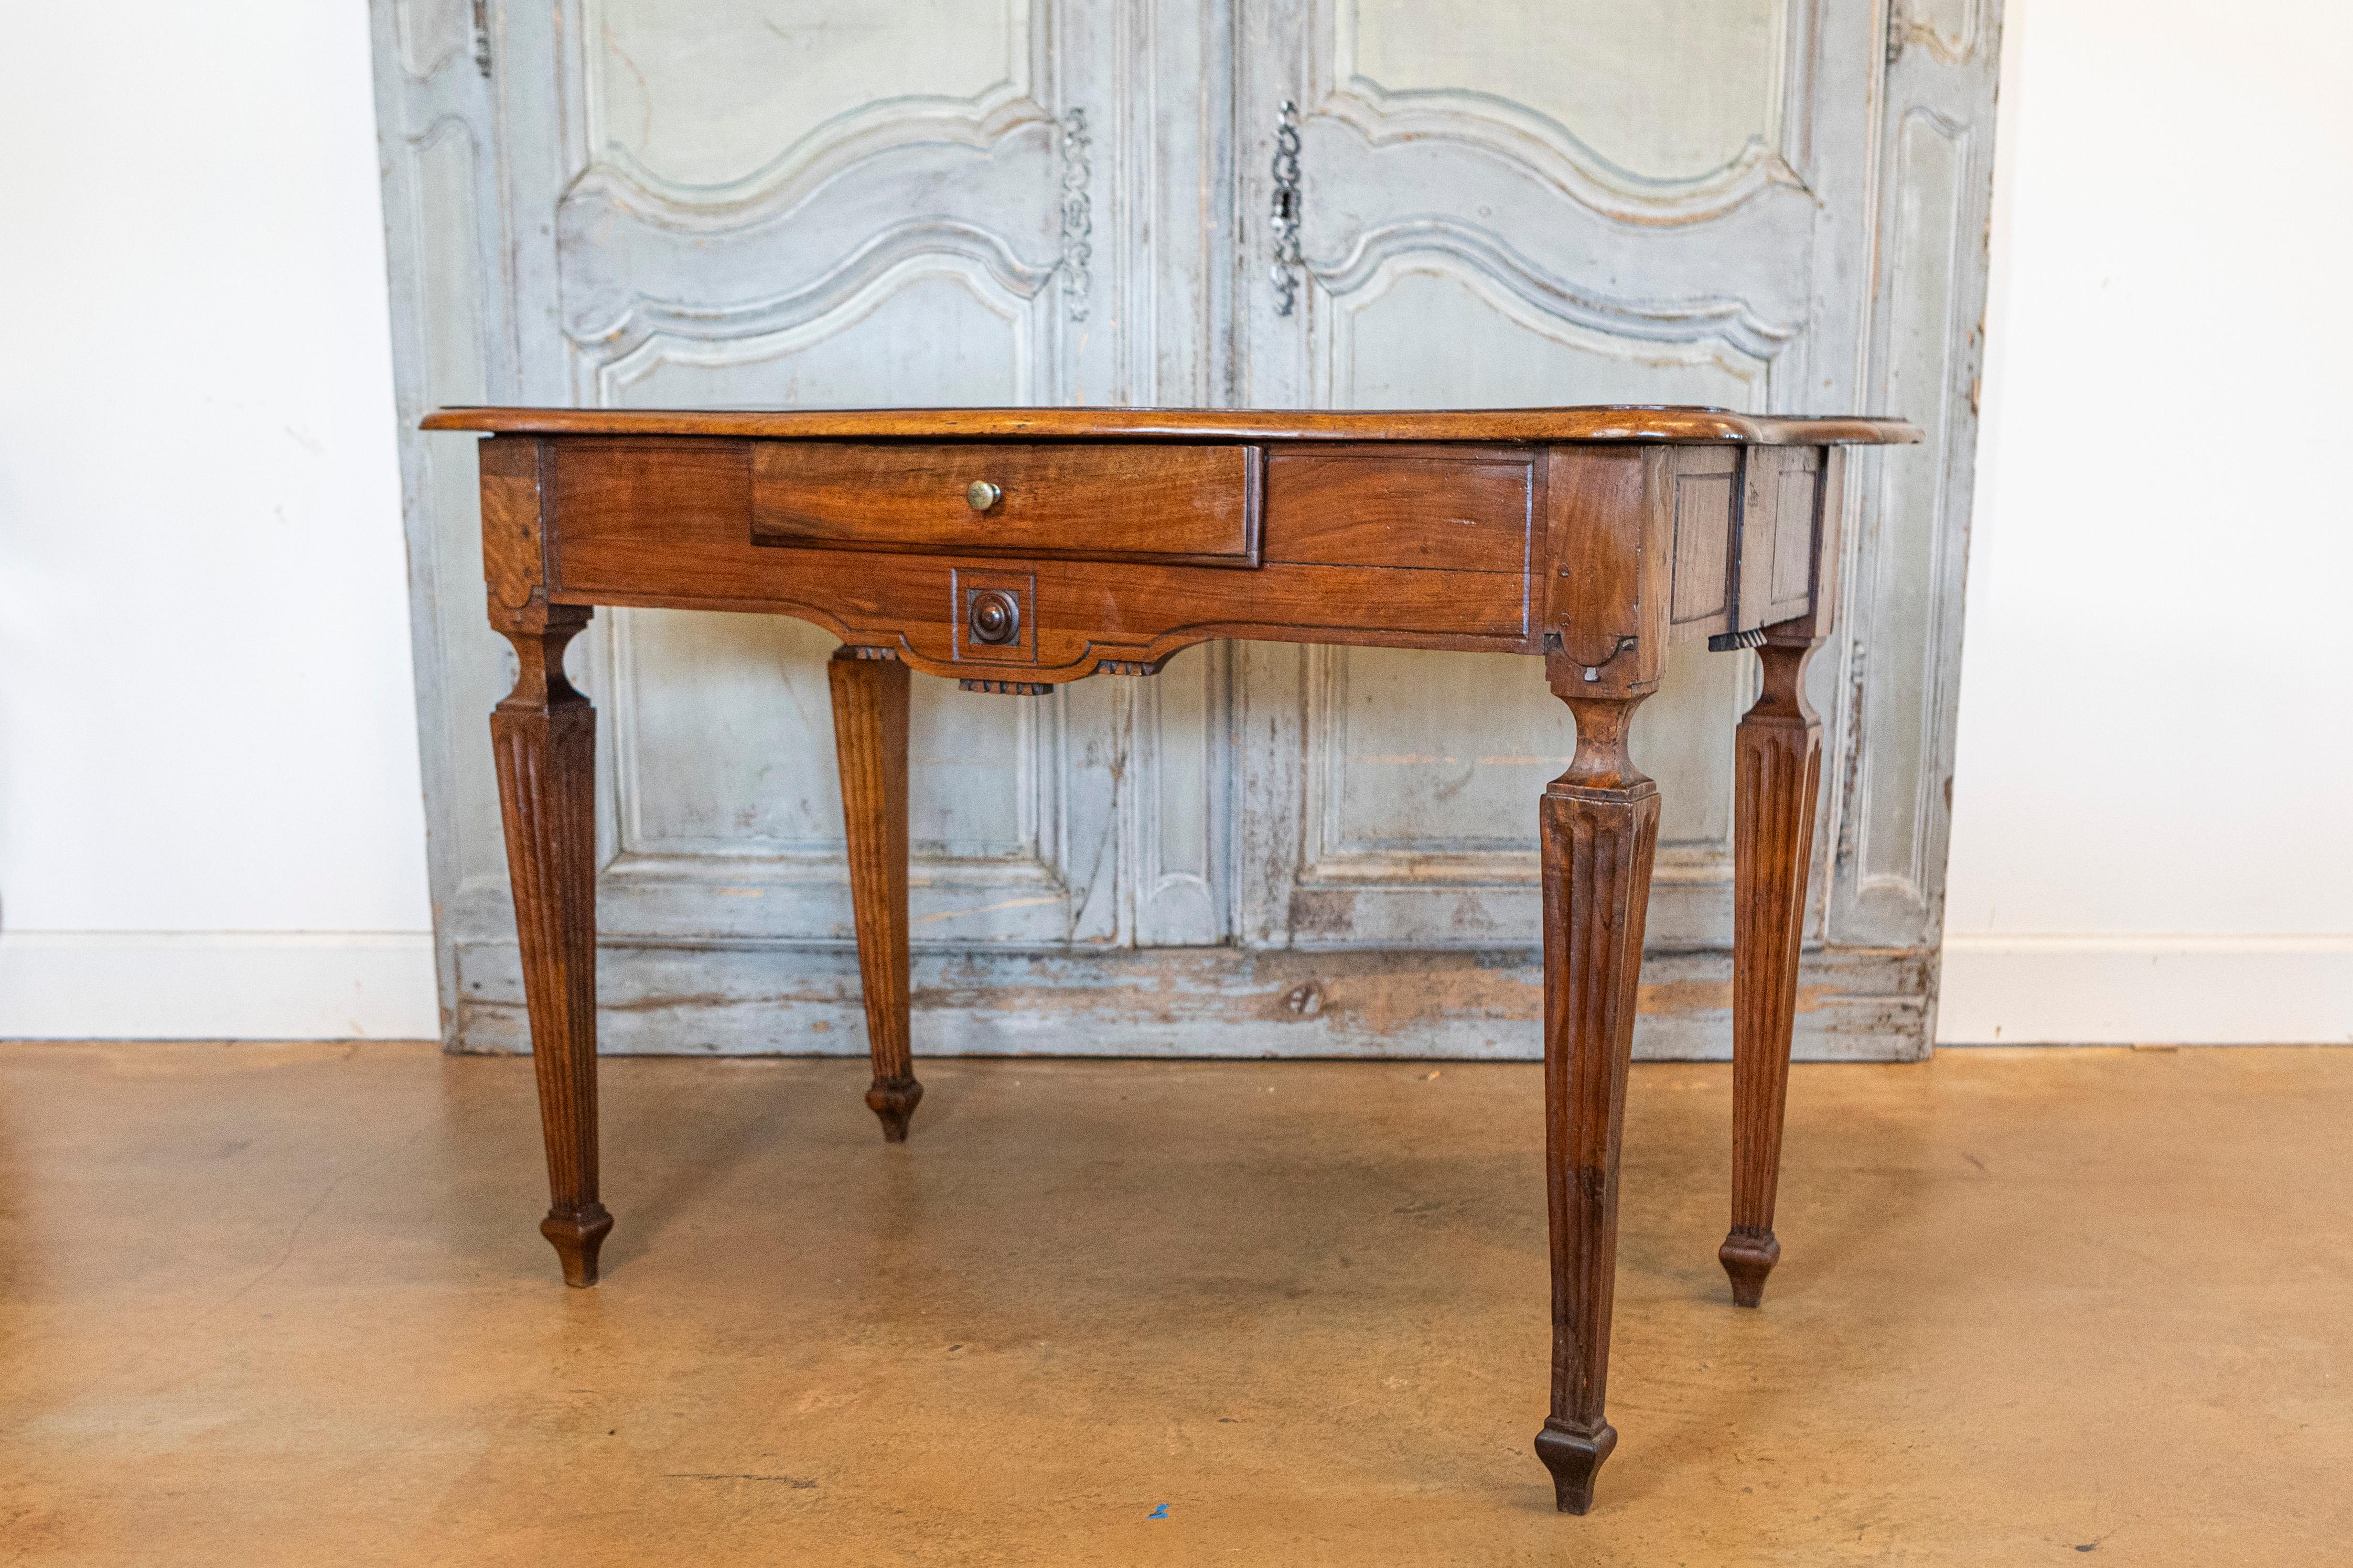 18th Century Italian Walnut Console Table with Serpentine Top and Carved Apron In Good Condition For Sale In Atlanta, GA